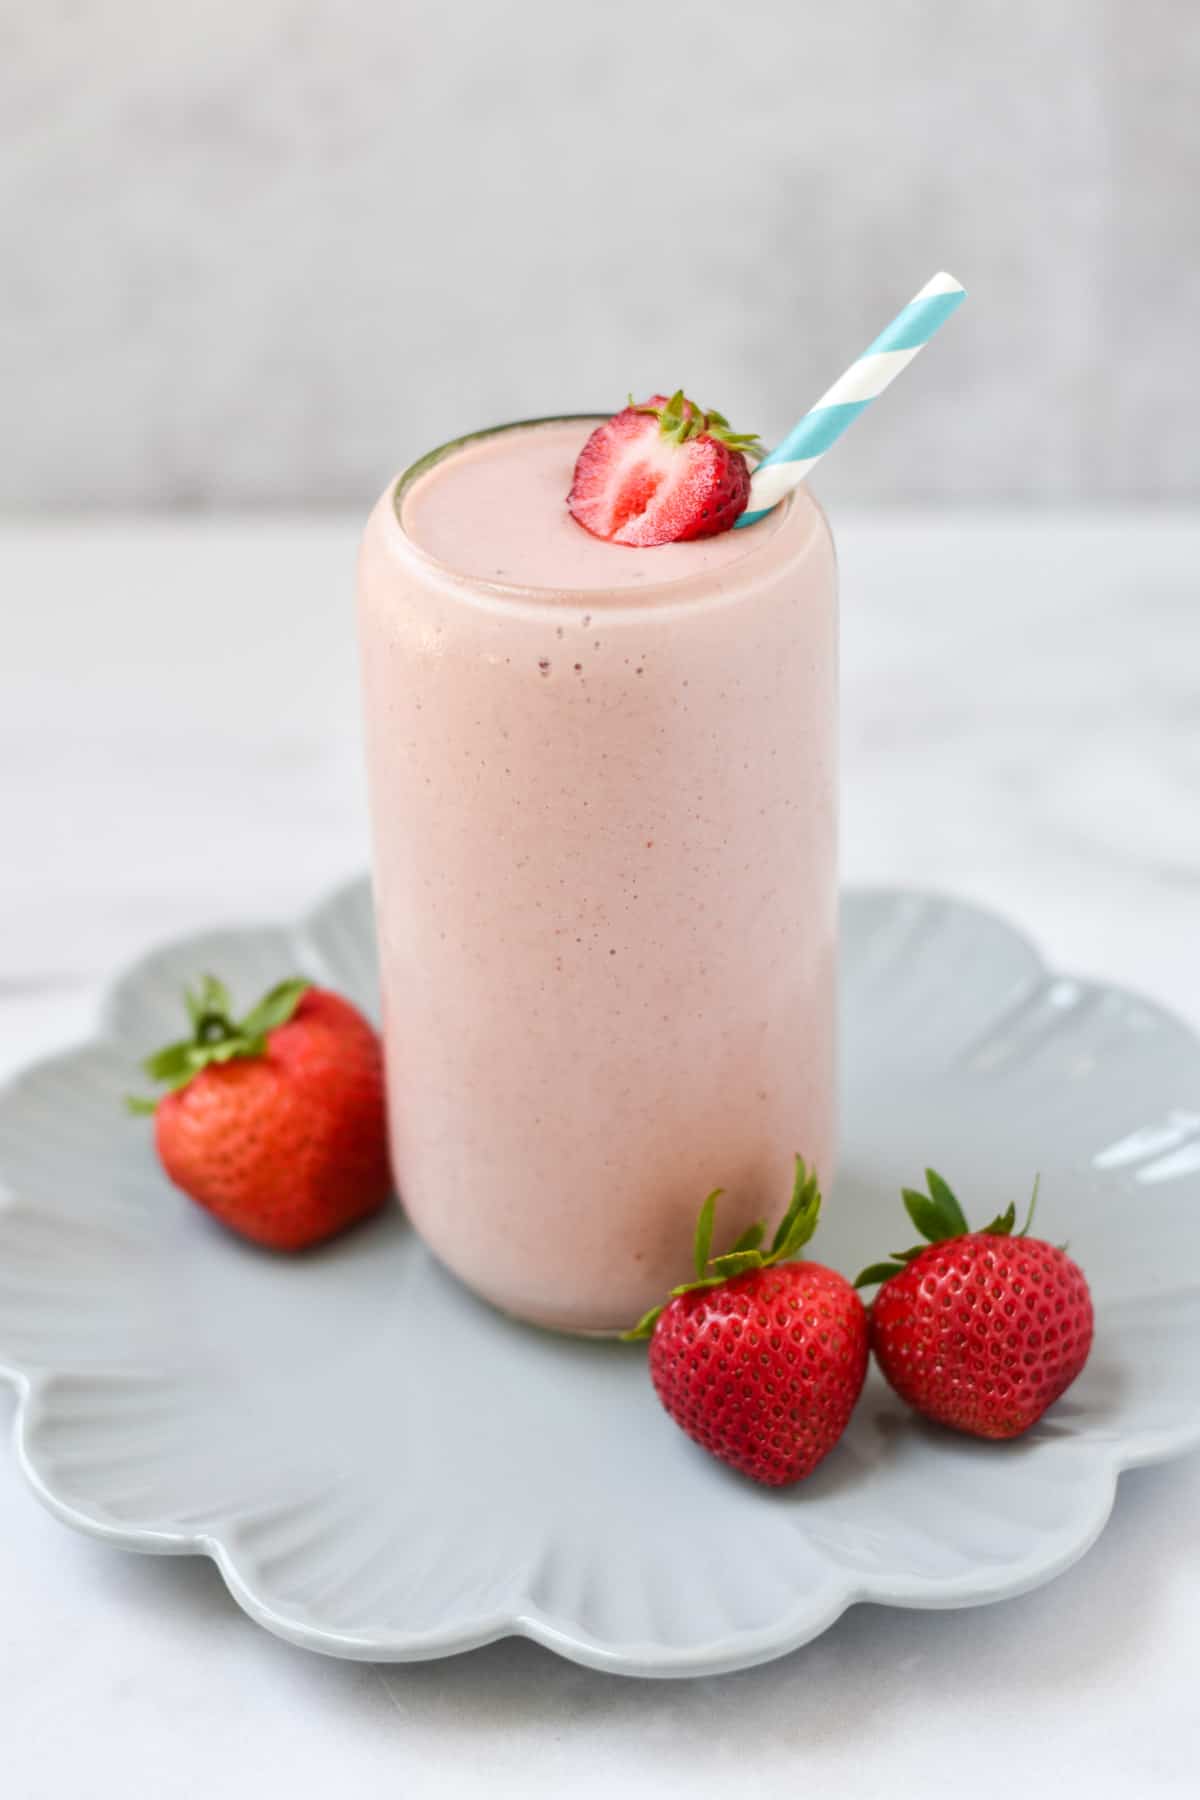 A smoothie with strawberries and cottage cheese on a scalloped plate with a striped straw.